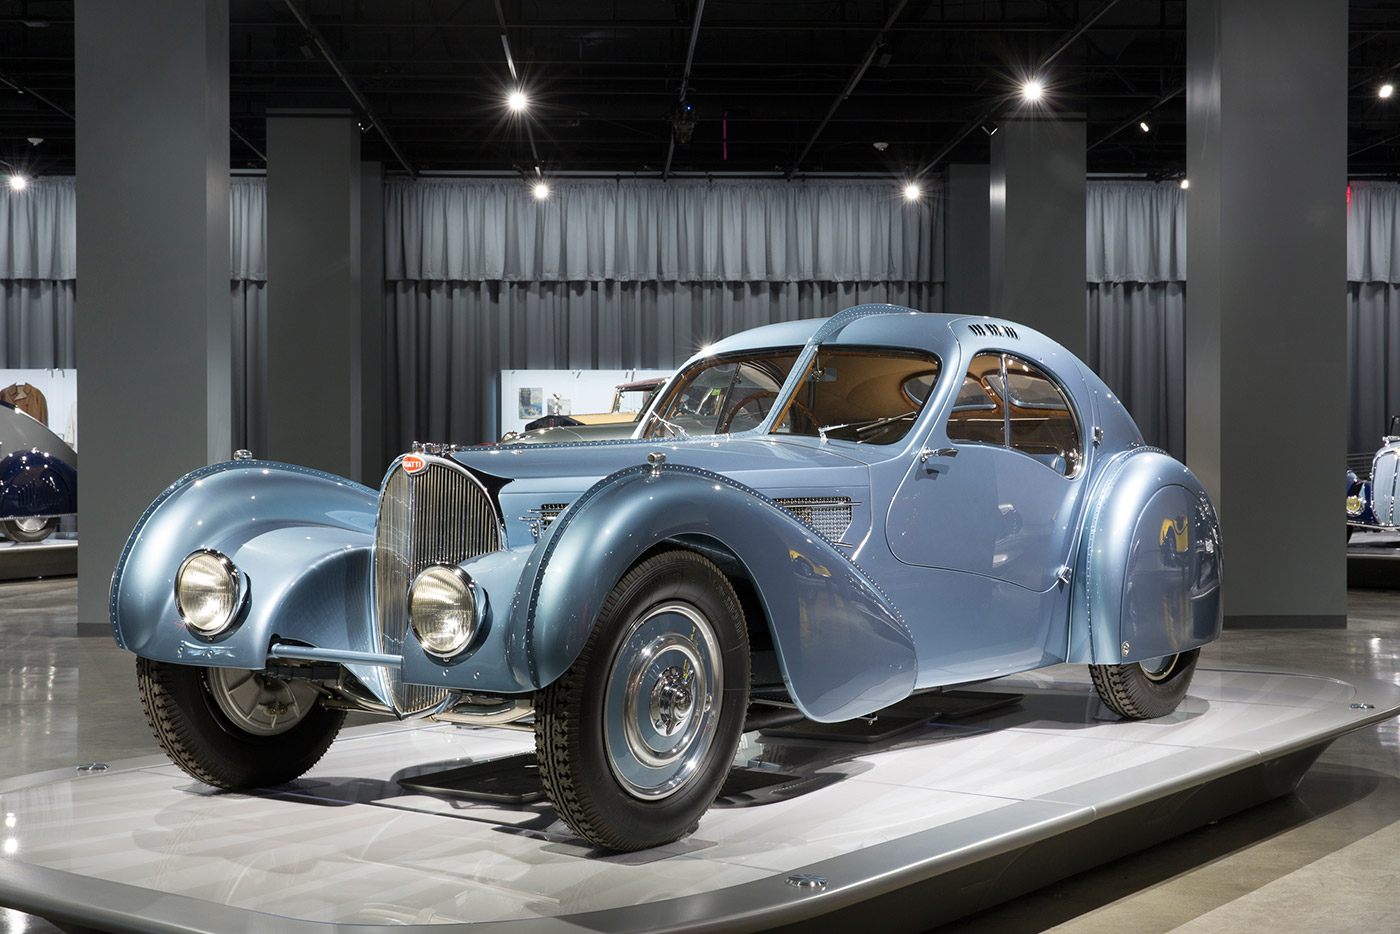 1936 Bugatti Type 57SC Atlantic Coupe: The Petersen has this sculptural piece on their &#x201C;Artistry&#x201D; floor&#x2014;Ralph Lauren owns the only other model on Earth